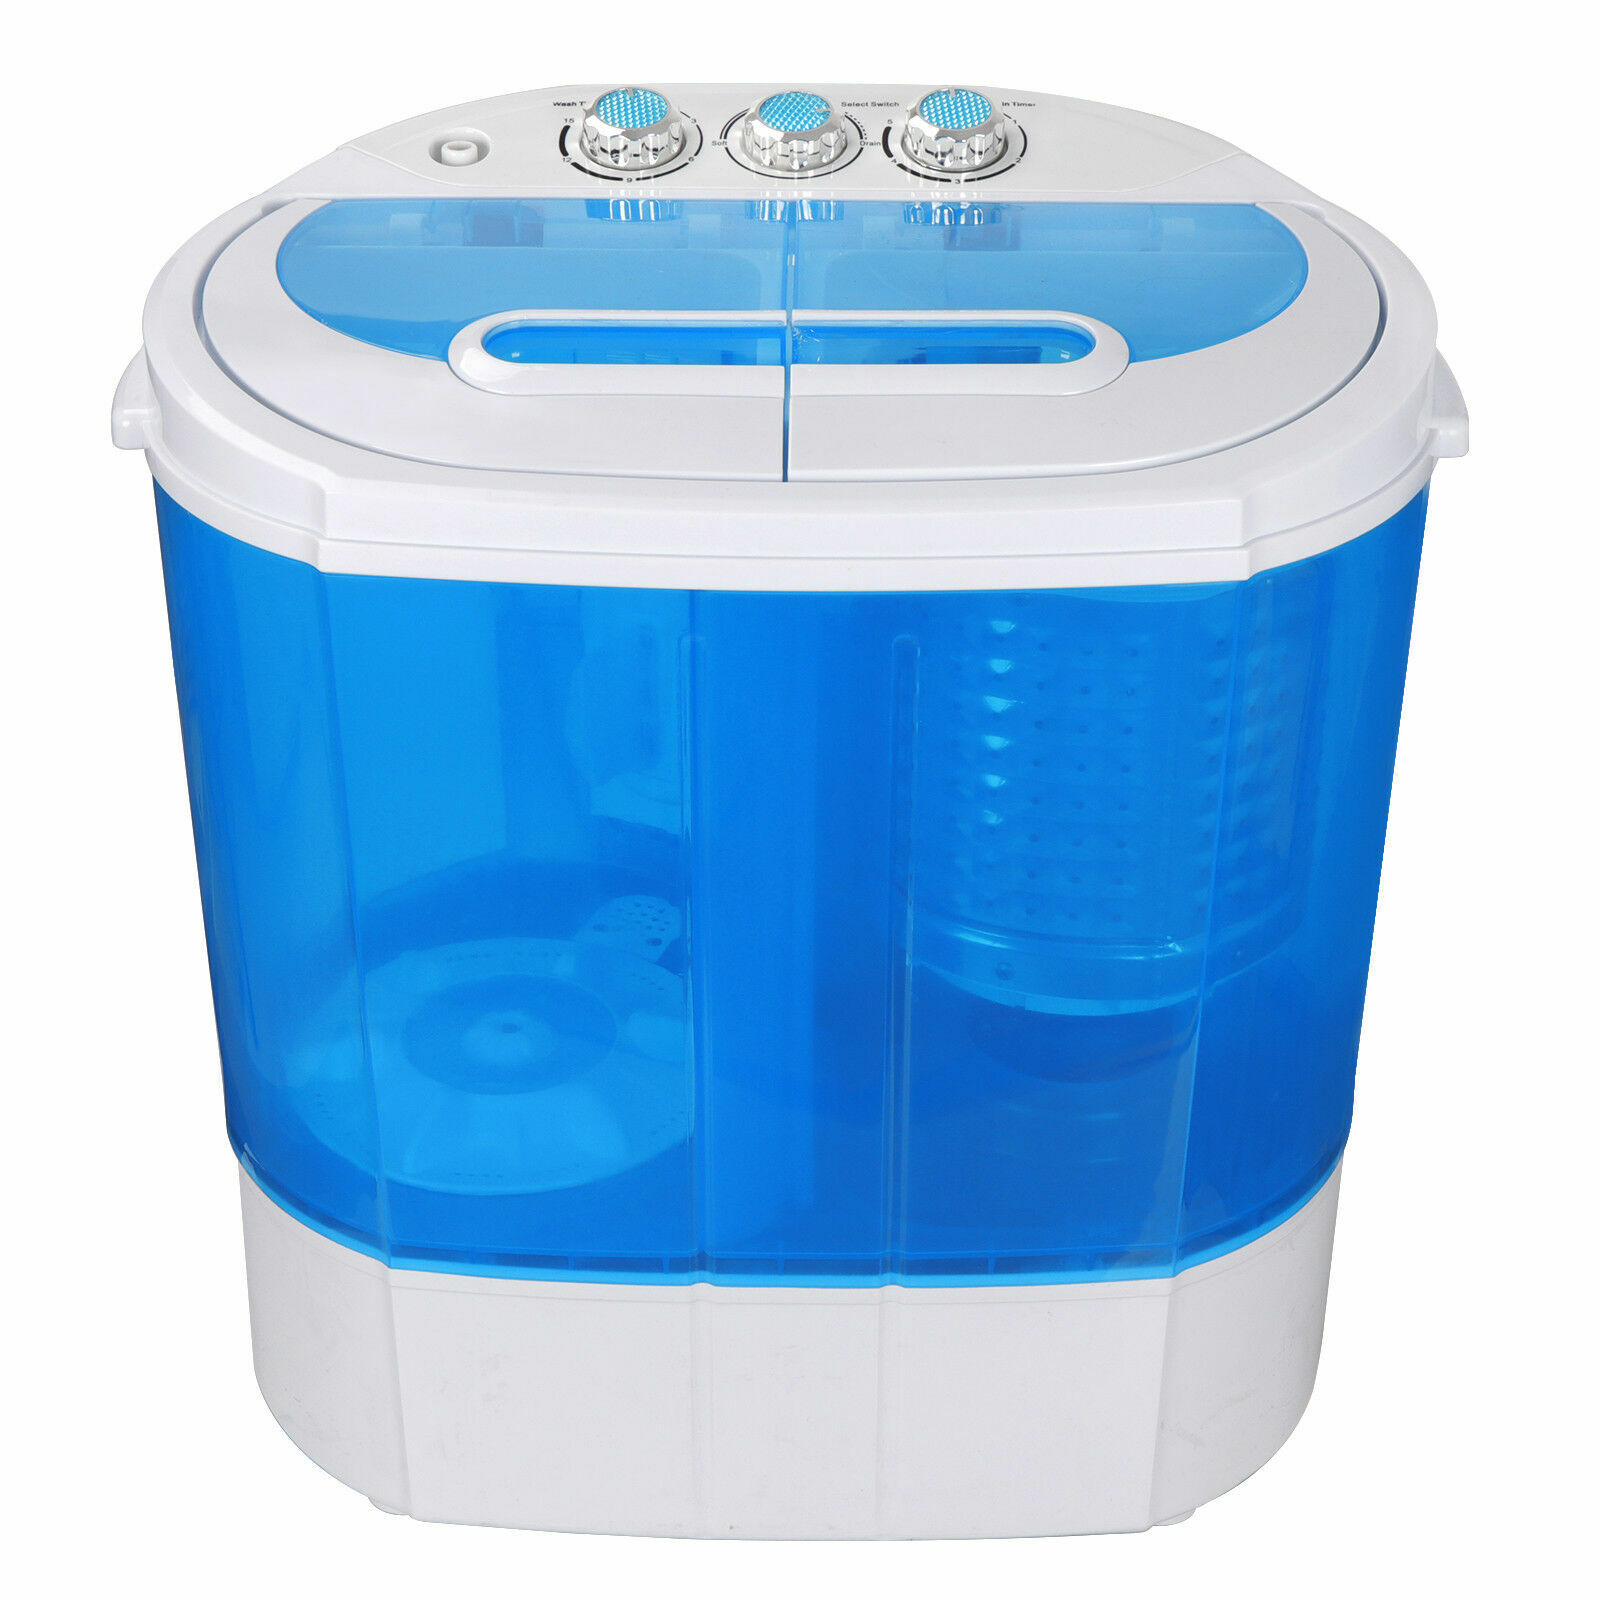 USED Portable Washing Machine Compact lightweight 10lbs Washer Spin Cycle...